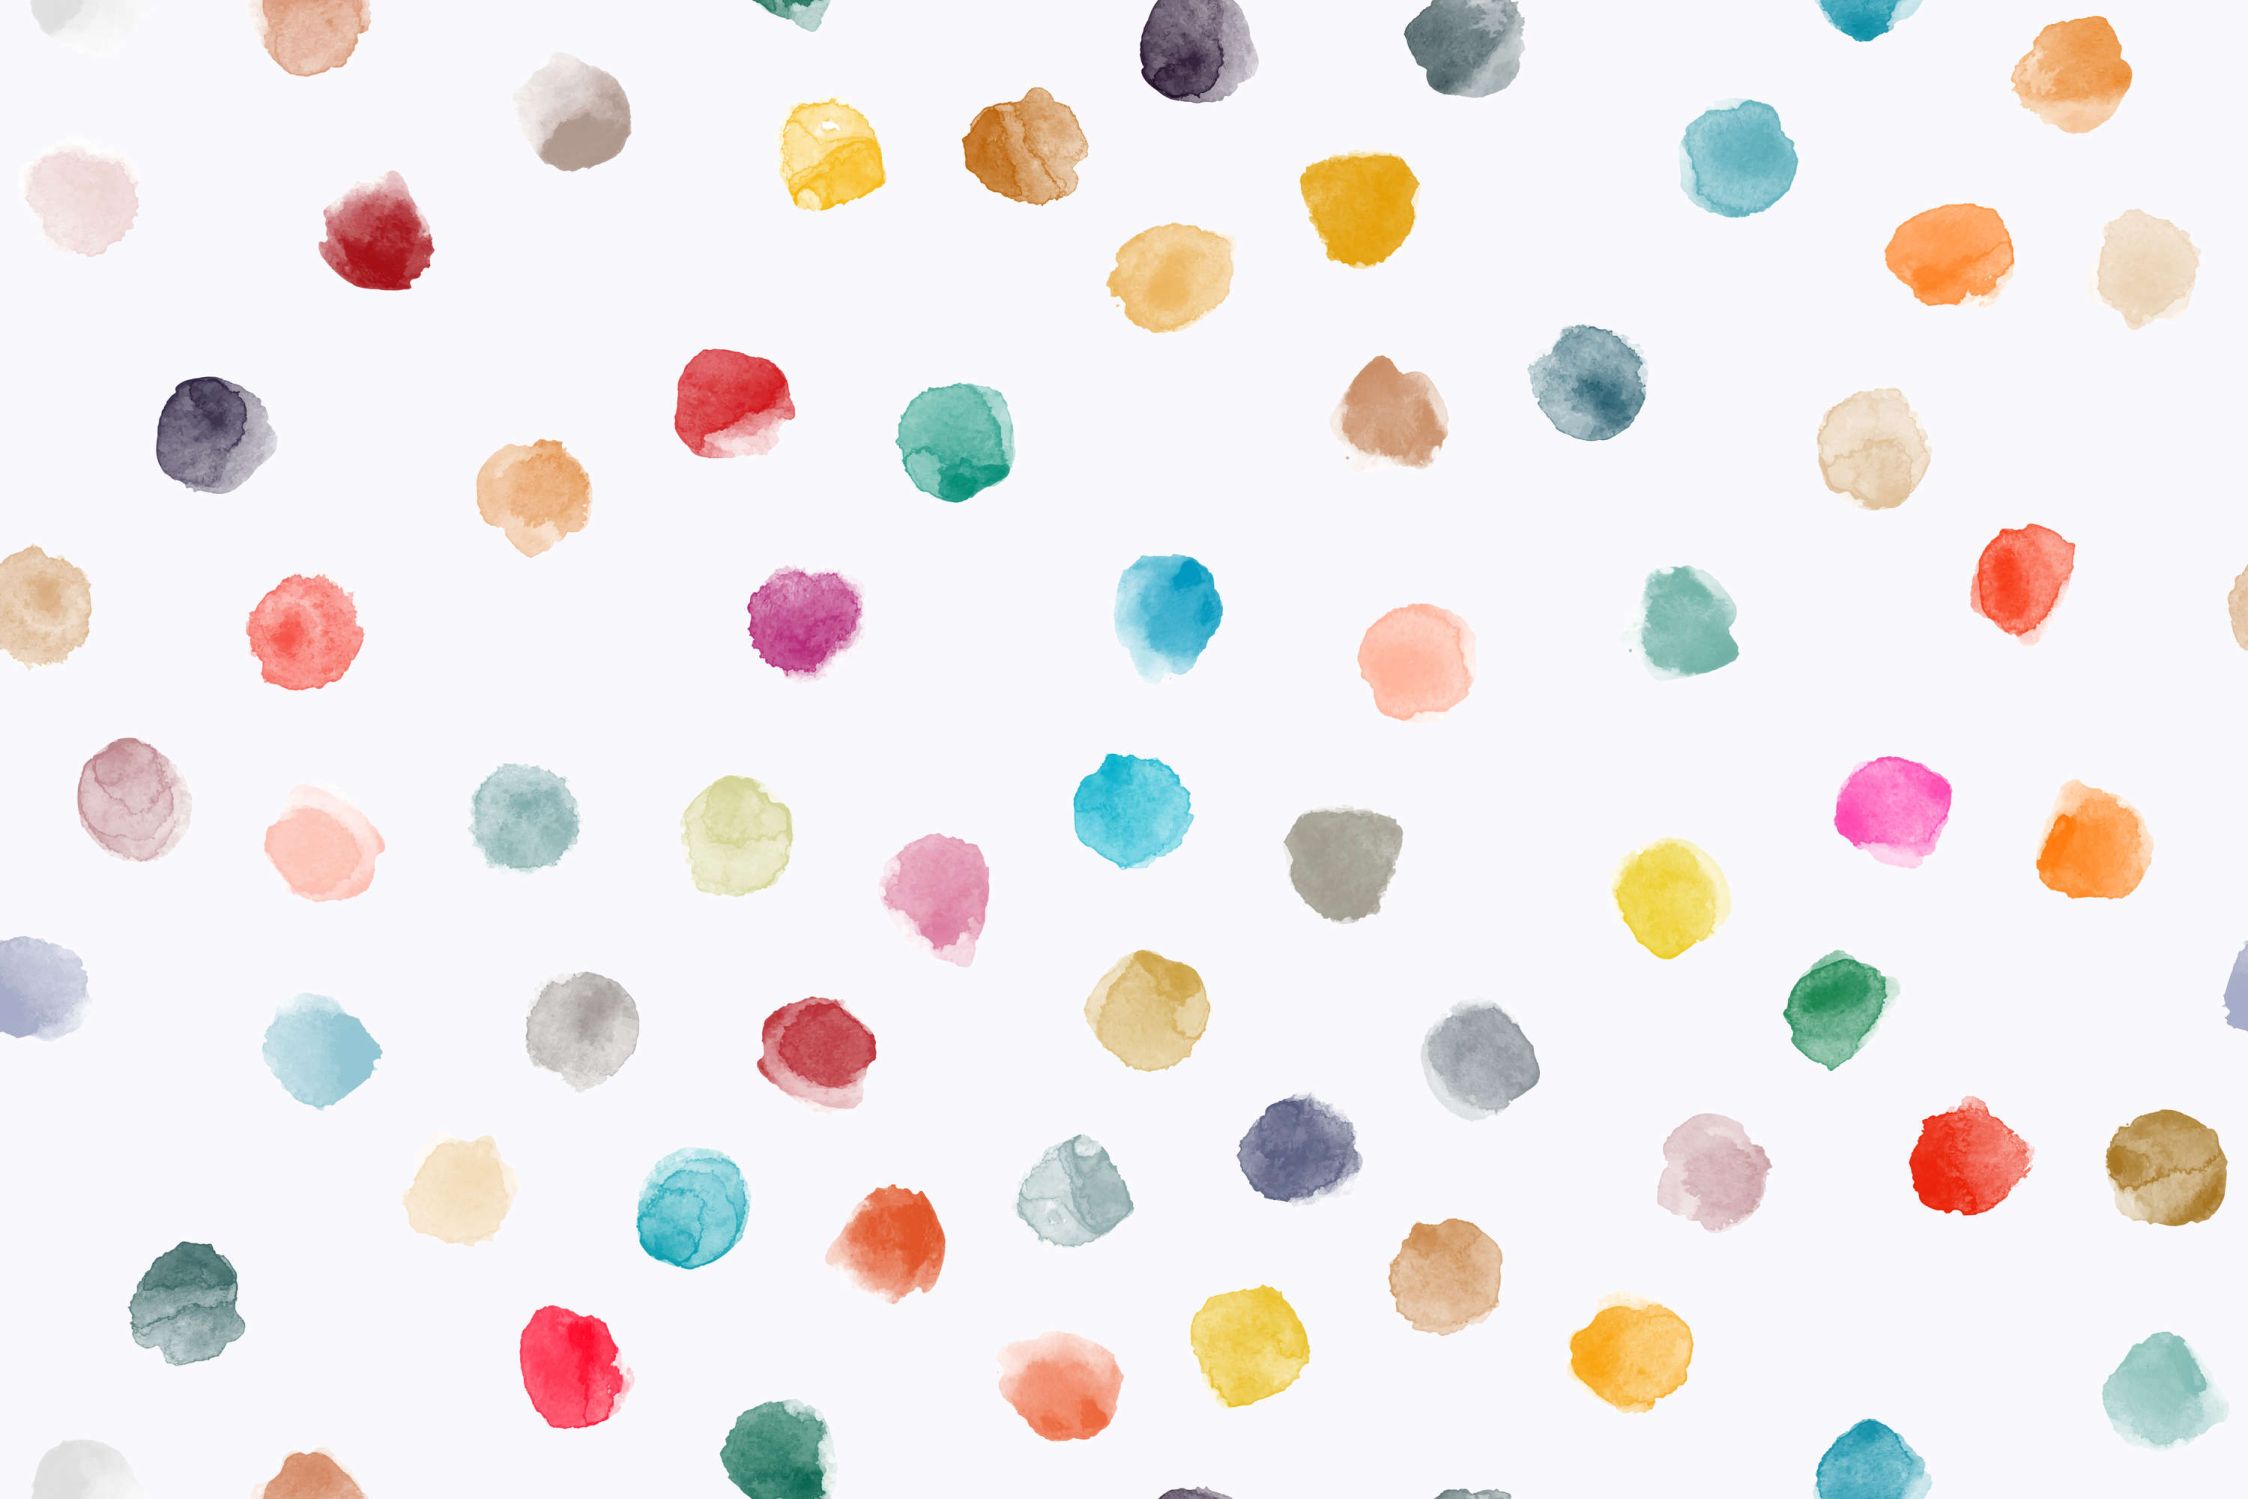             Nursery mural with colourful dots - textured non-woven
        